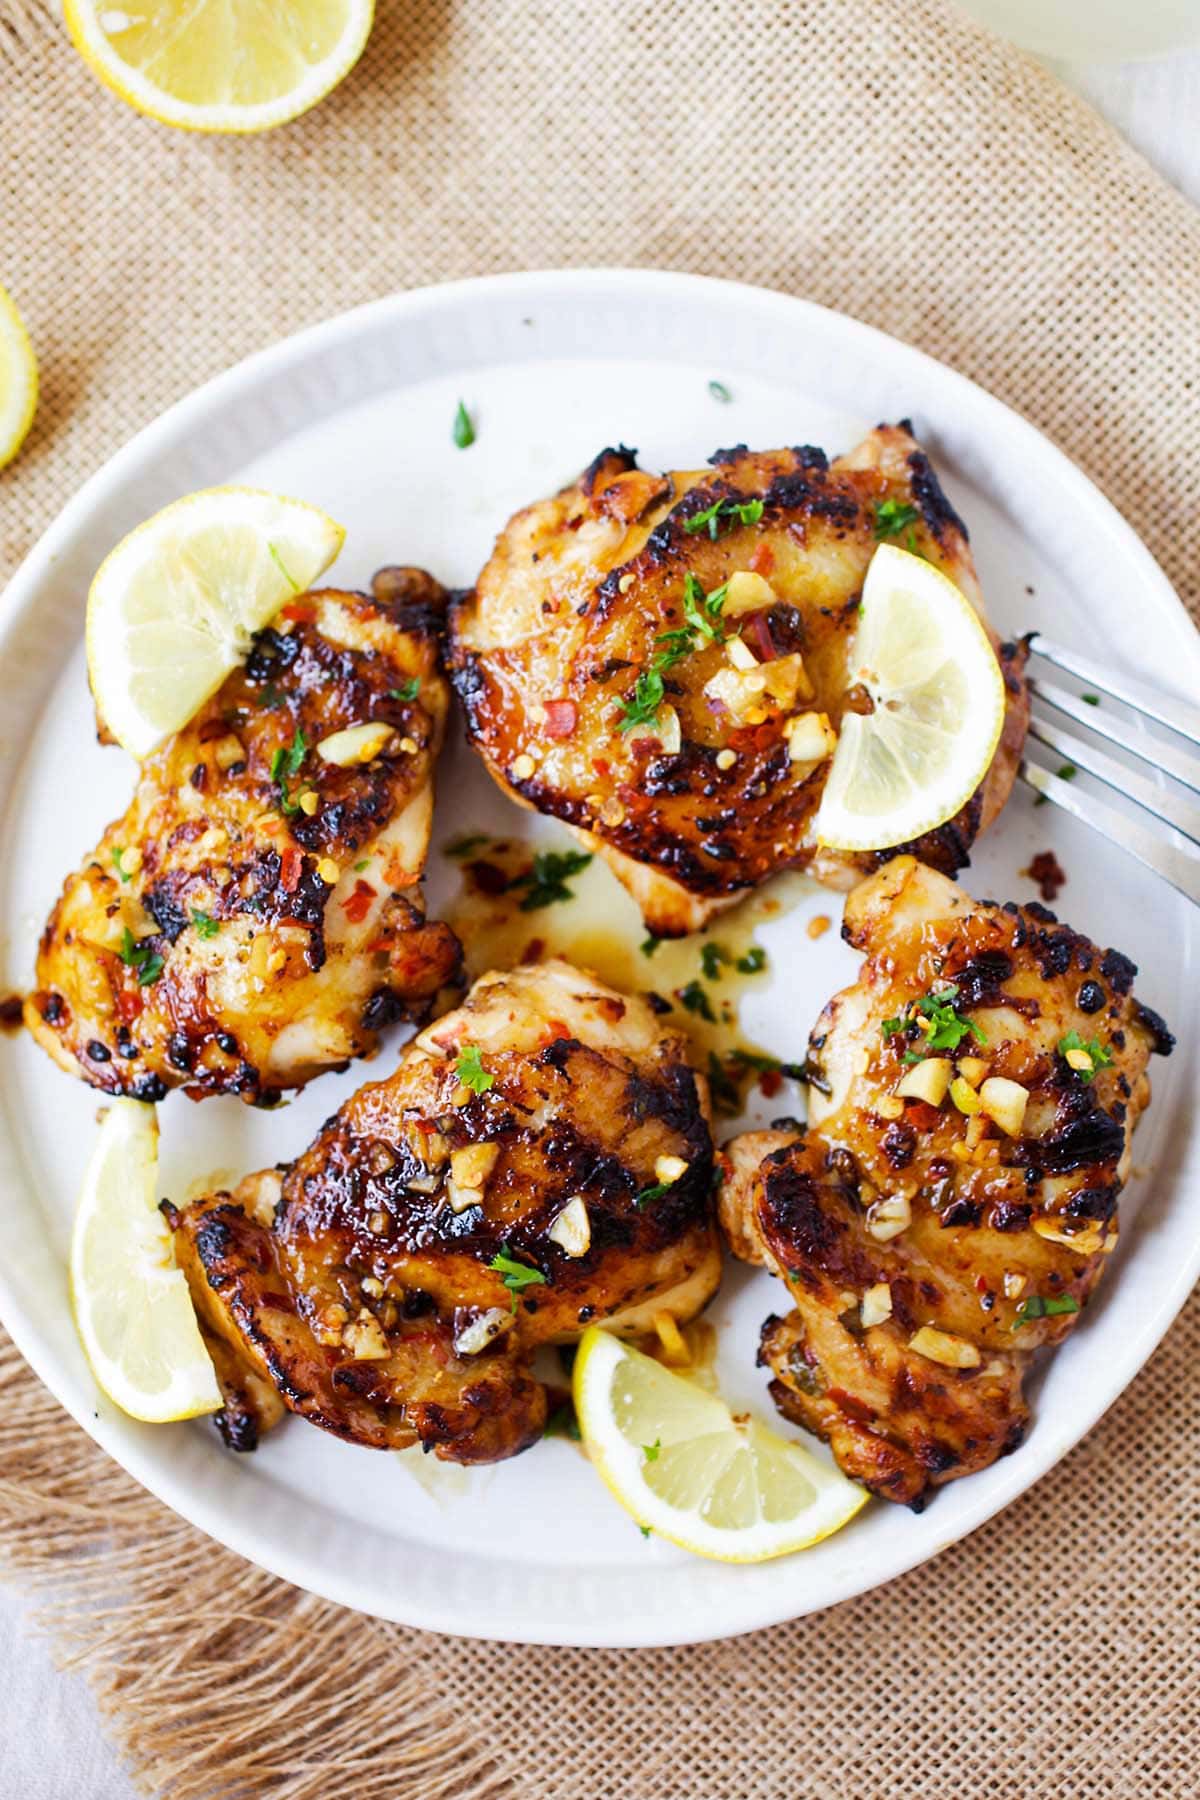 Easy and Delicious Lemon Garlic chicken recipe, featuring chicken covered in lemon, garlic, honey, and parsley.